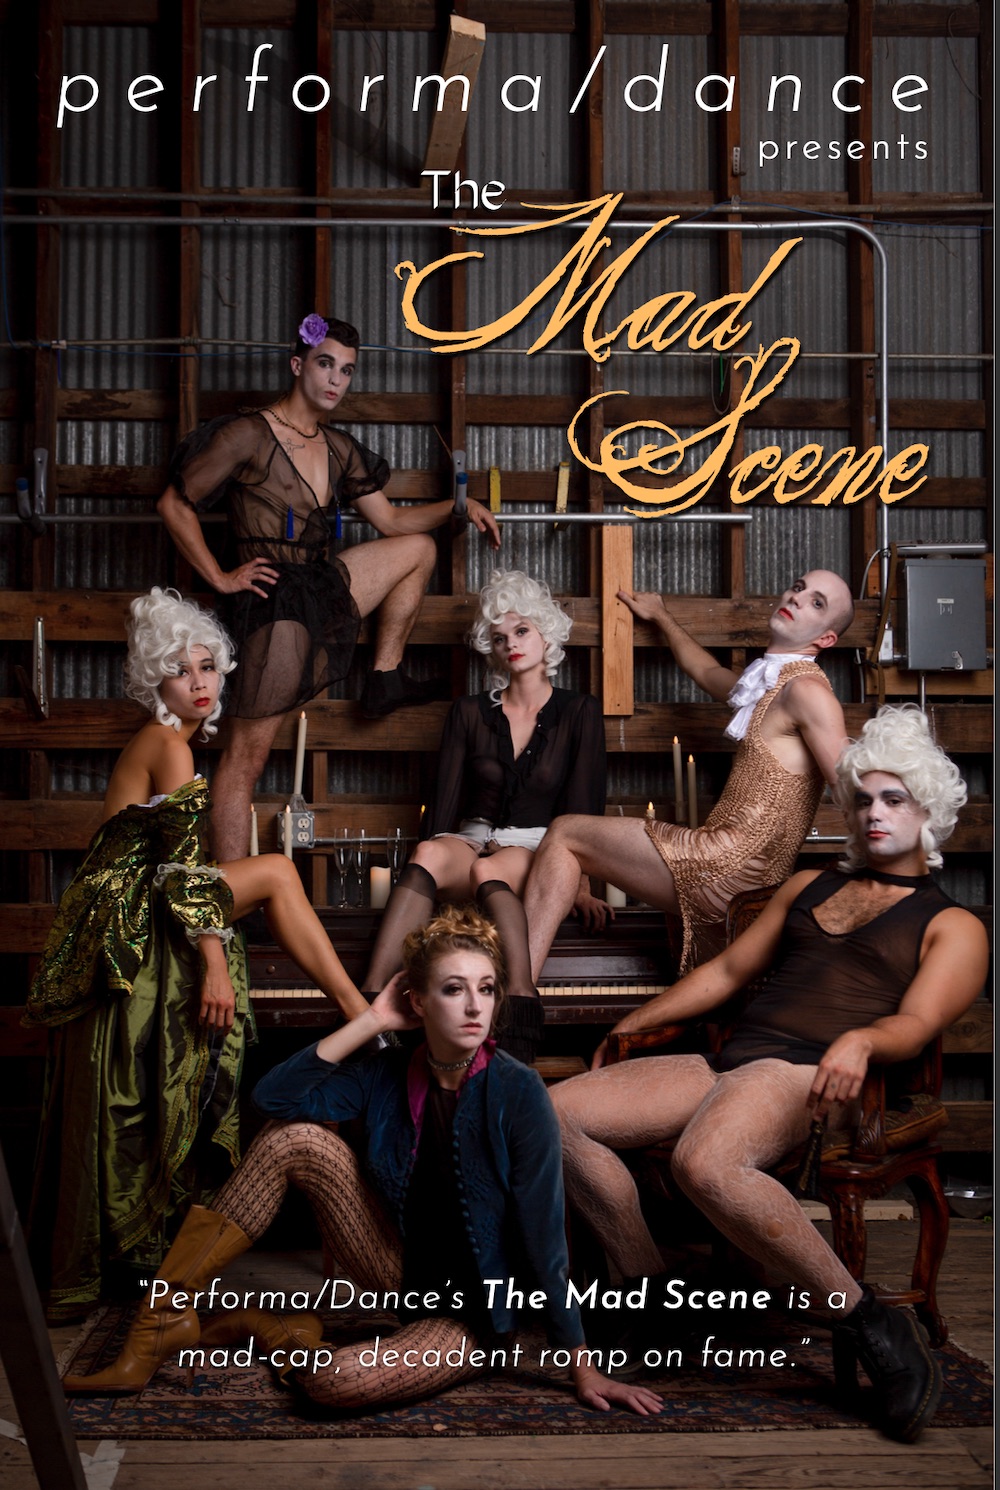 The Mad Scene by Performa/Dance